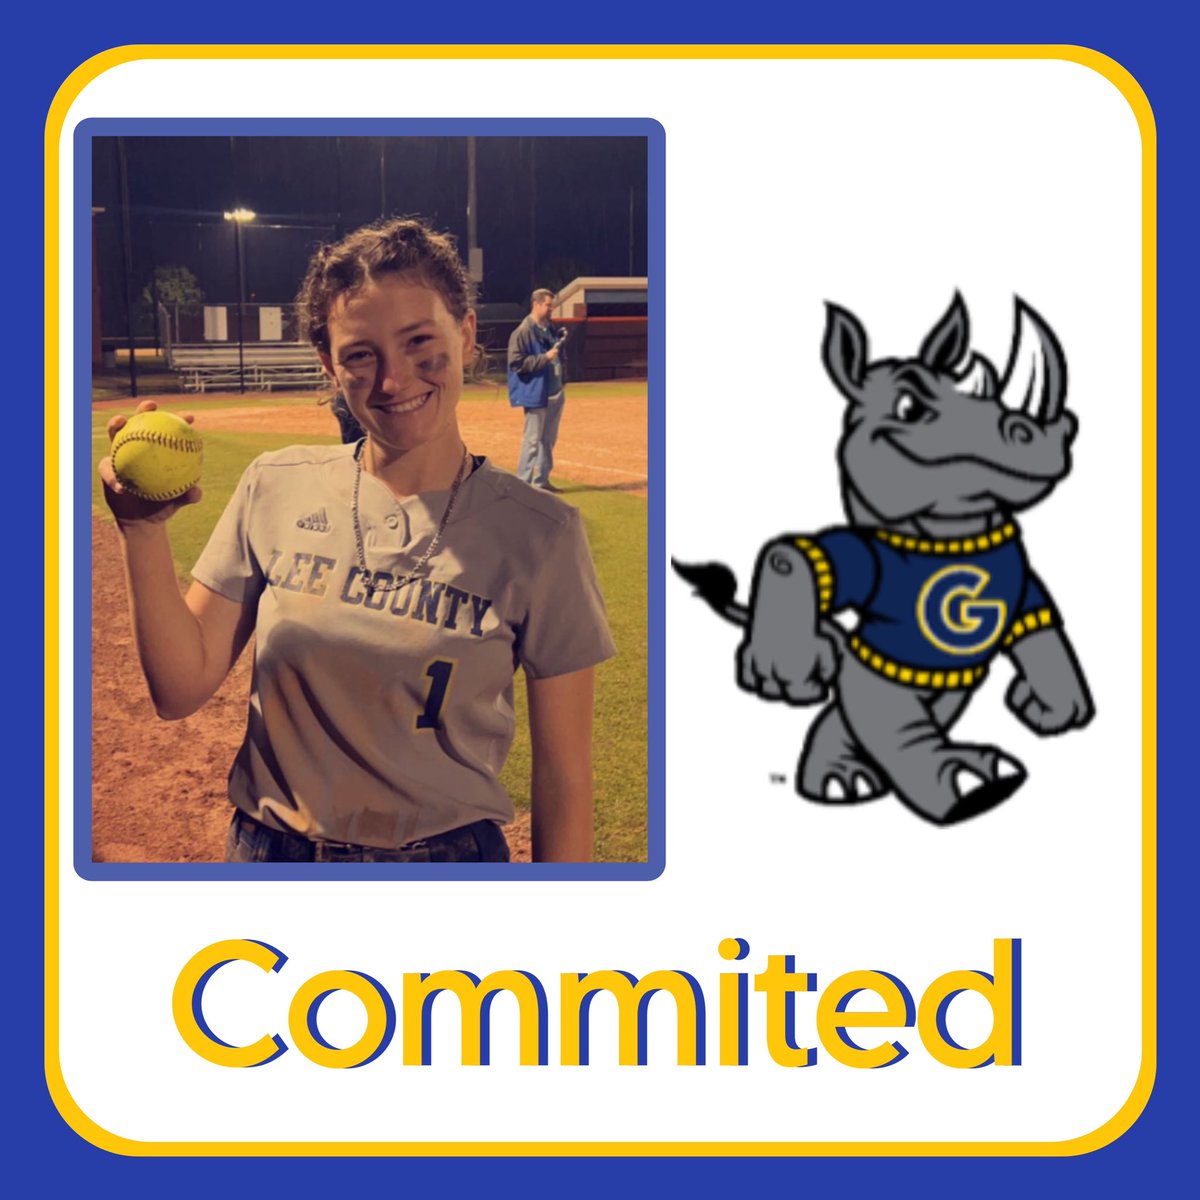 I would like to announce I have committed to Gaston College. I wanna say thank you for players and coaches for pushing me on an off the field . I am very grateful for this opportunity and excited to see what I do next. Go Rhinos 🦏